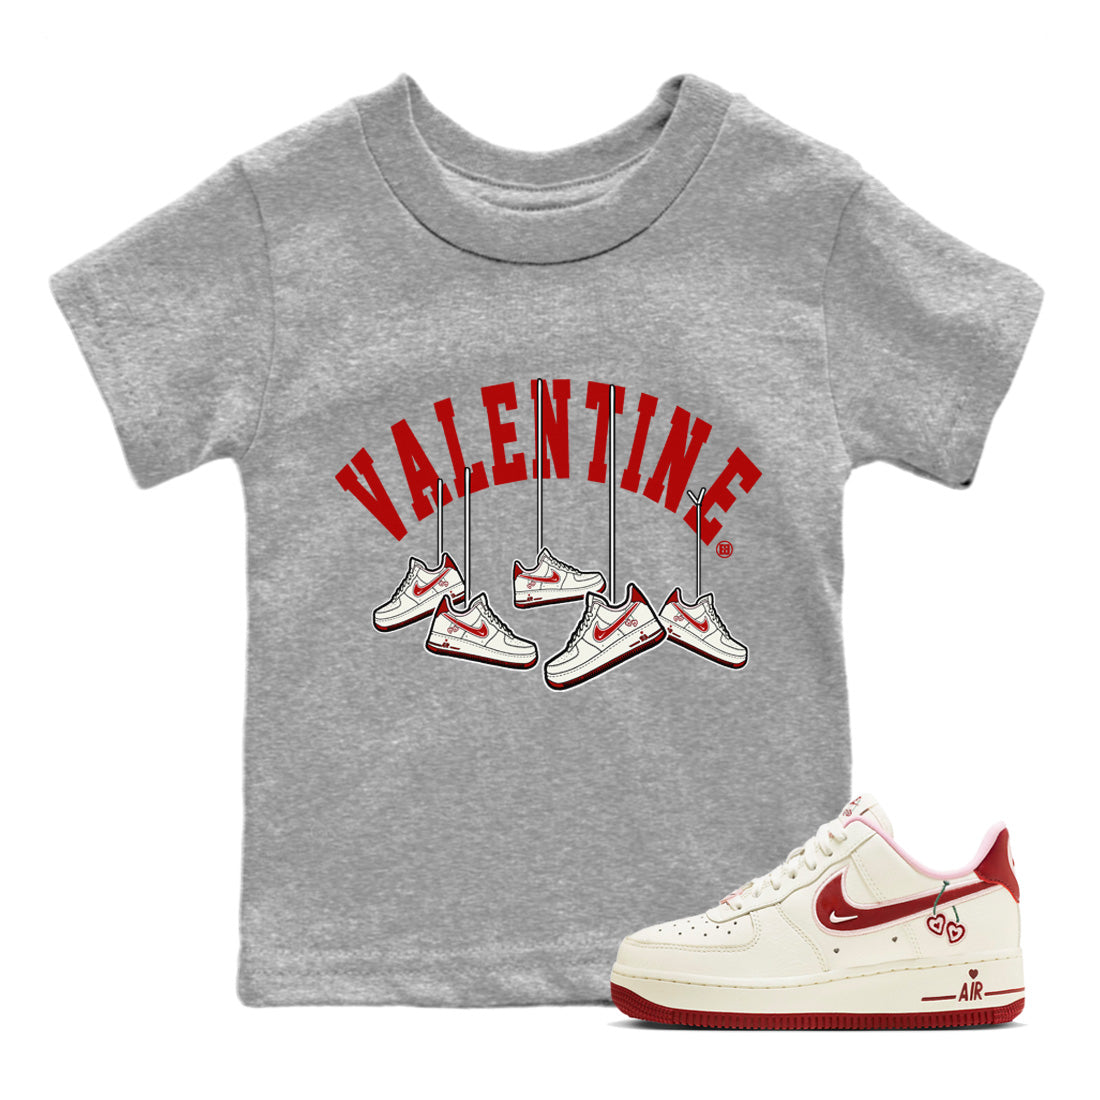 Air Force 1 Valentines Day Sneaker Match Tees Hanging Sneakers Sneaker Tees Air Force 1 Valentines Day Sneaker Release Tees Kids Shirts